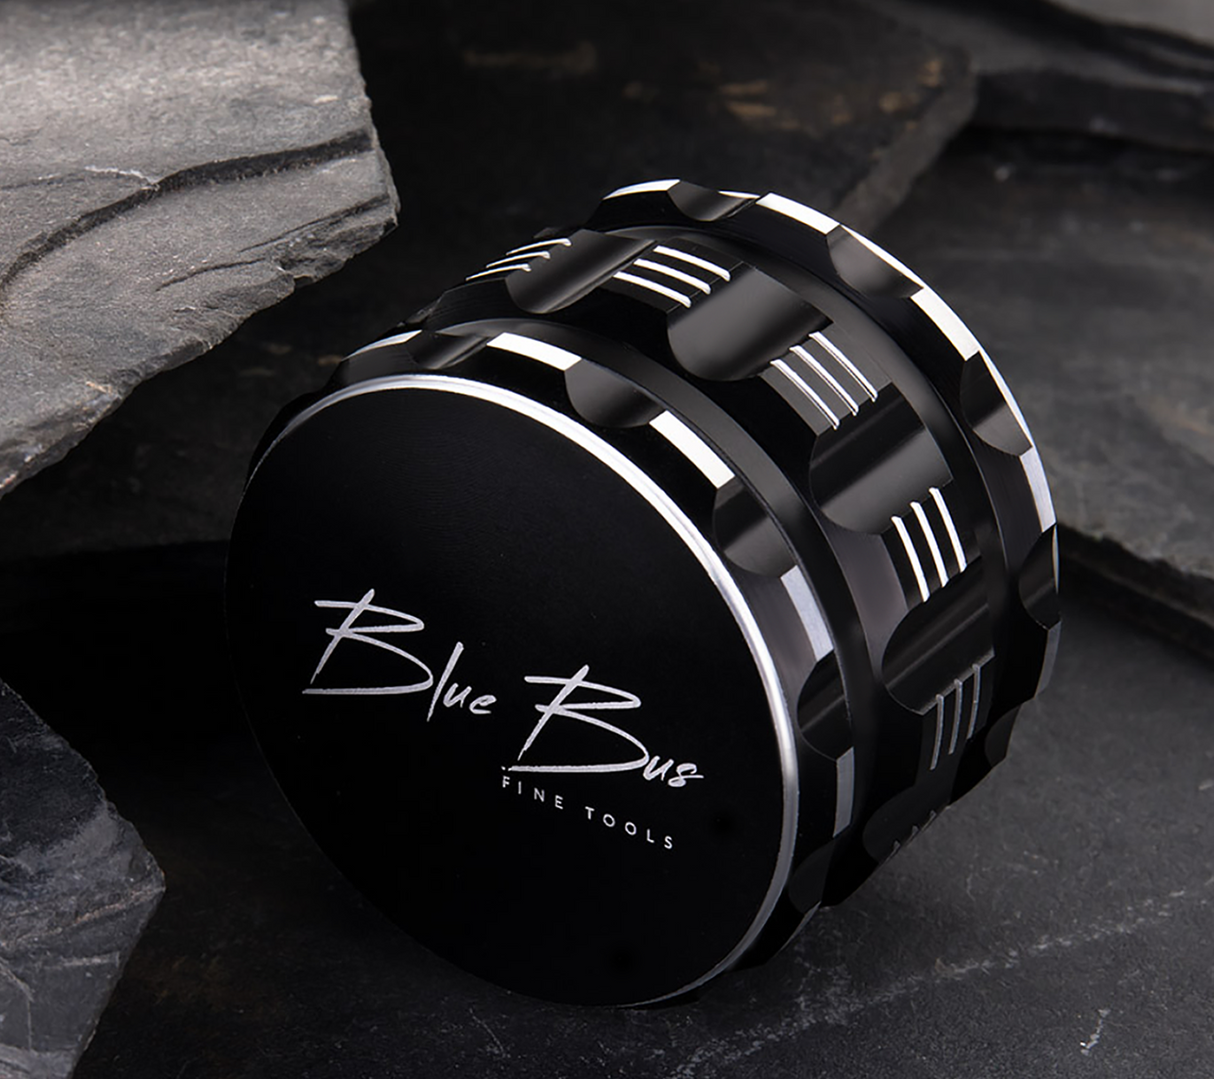 Blue Bus M1 Aluminum 4-Part Herb Grinder in Black, Compact Design, on Stone Background